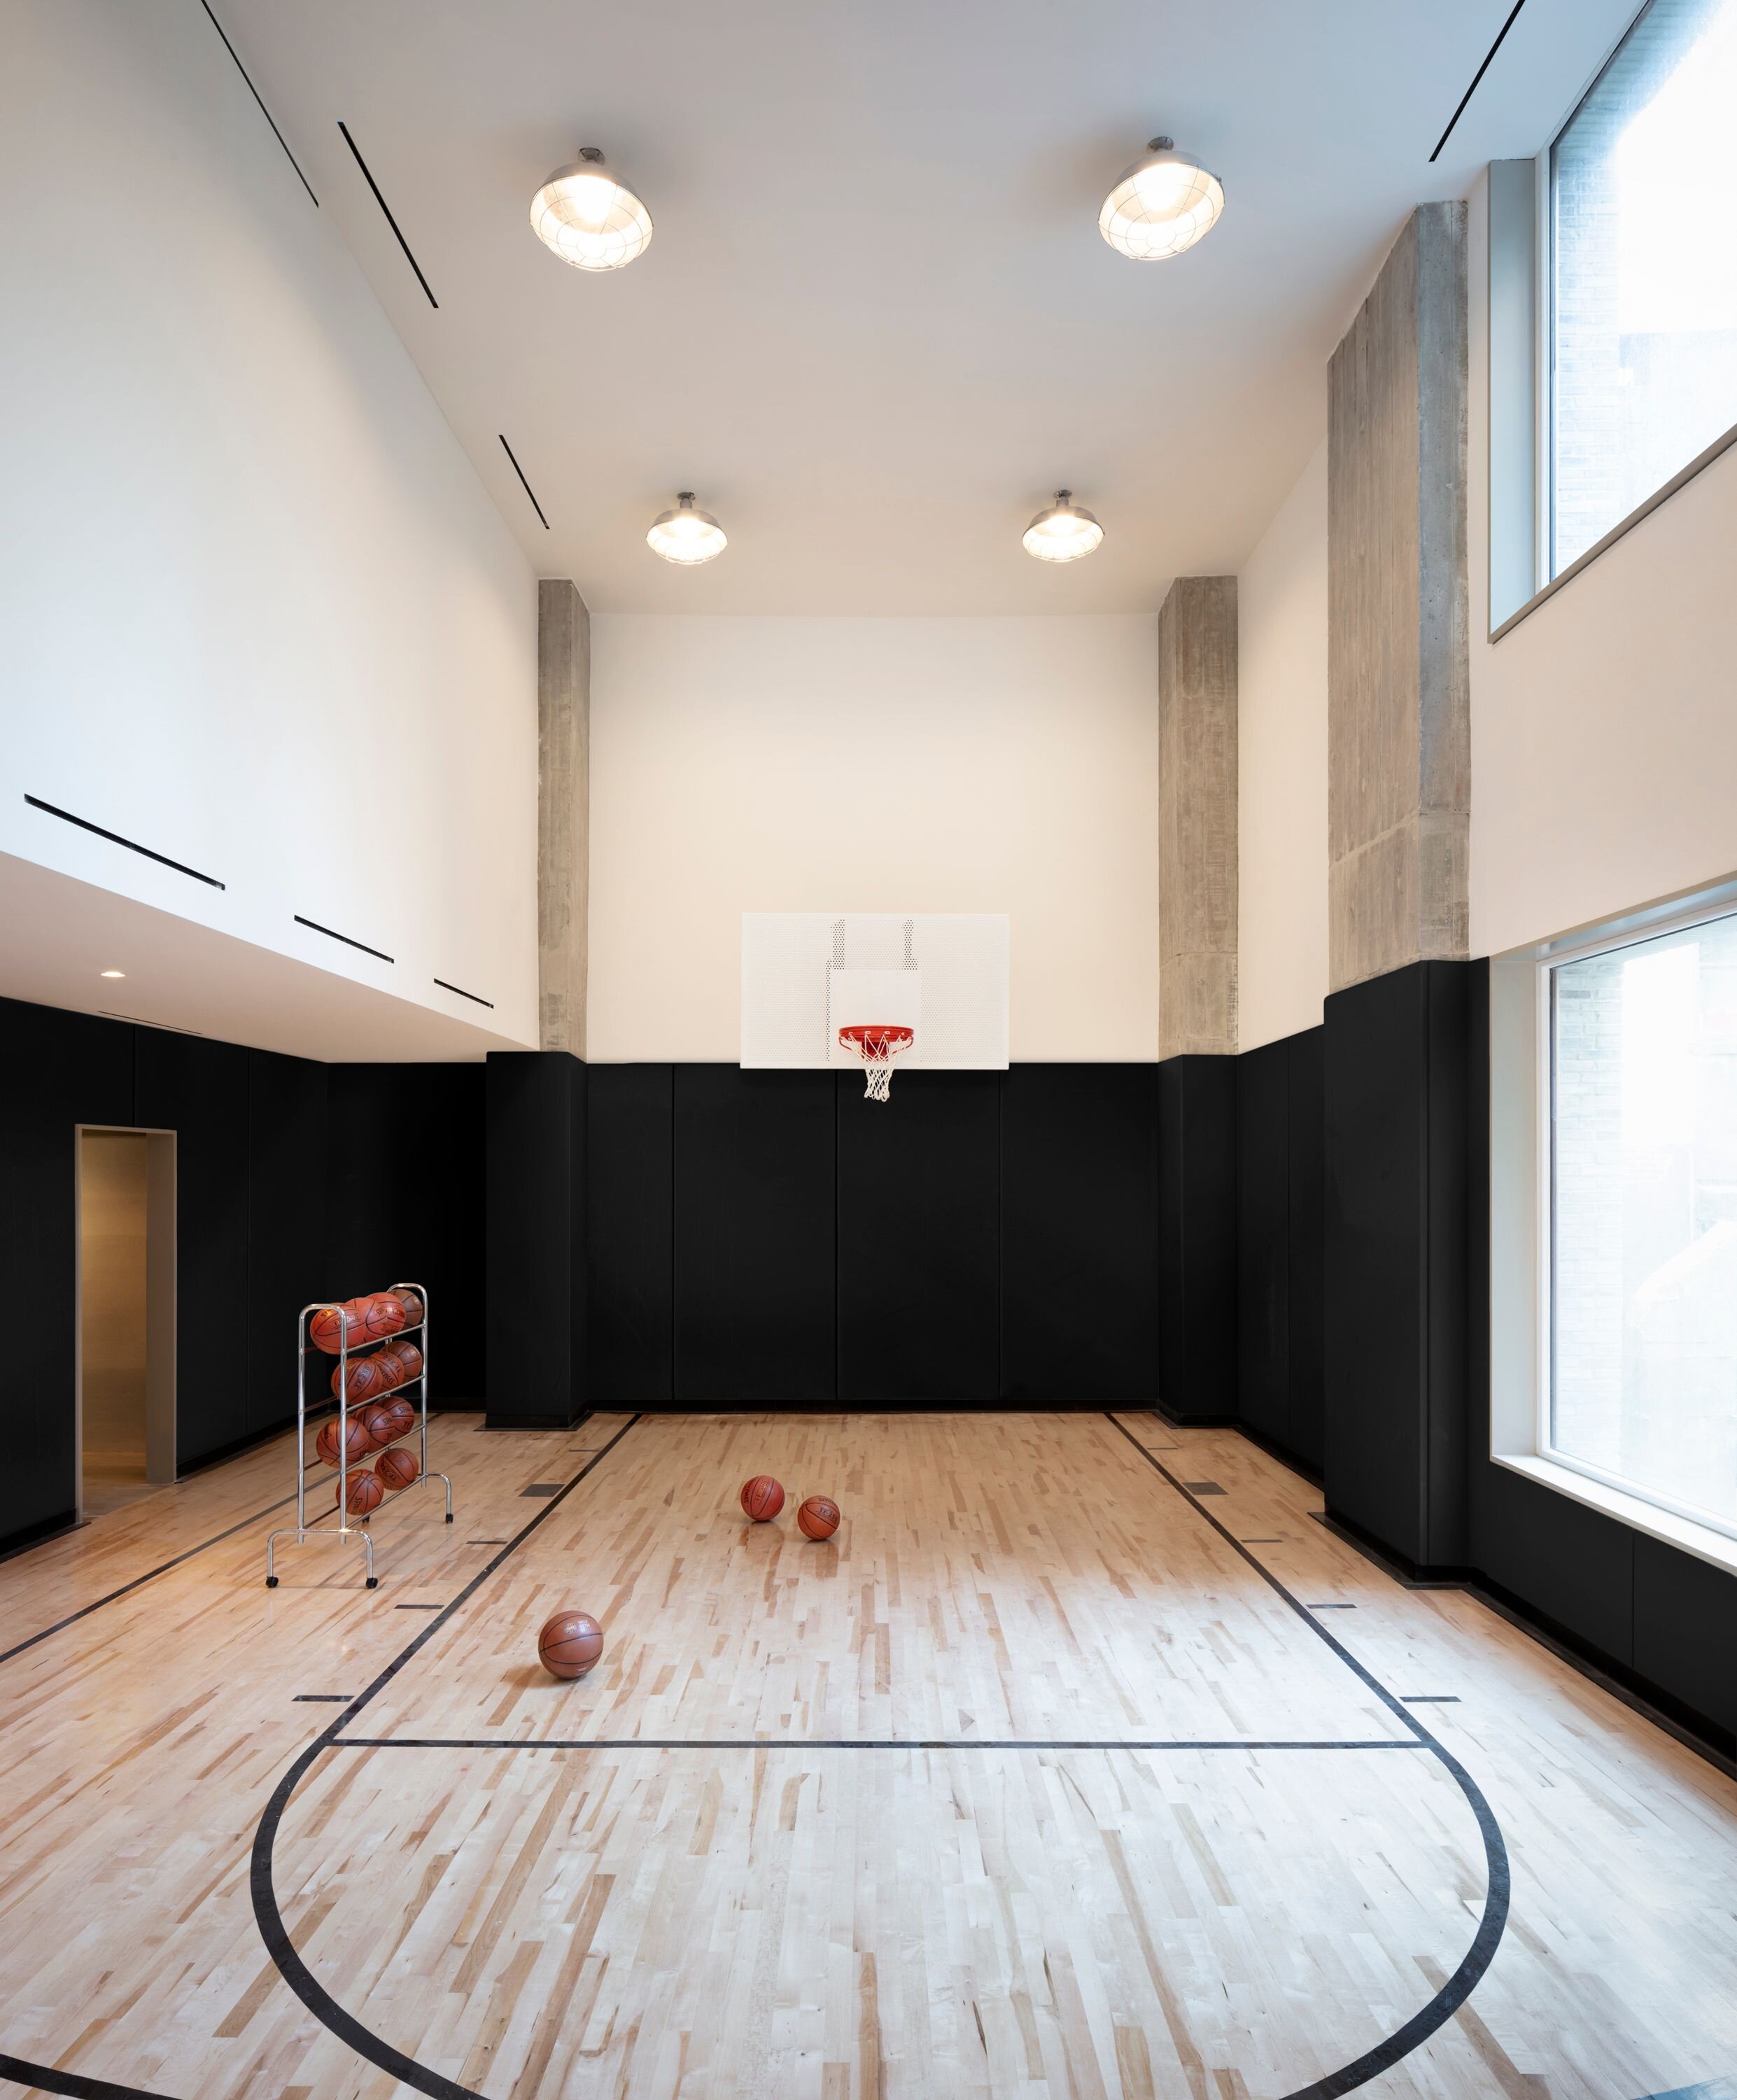   Basketball   Situated in the Upper East Side's coveted Carnegie Hill neighborhood,  180 East 88th Street  boasts a striking basketball court perfect for those looking to shoot for the stars after watching an all-time-favorite summer Olympic sport. 